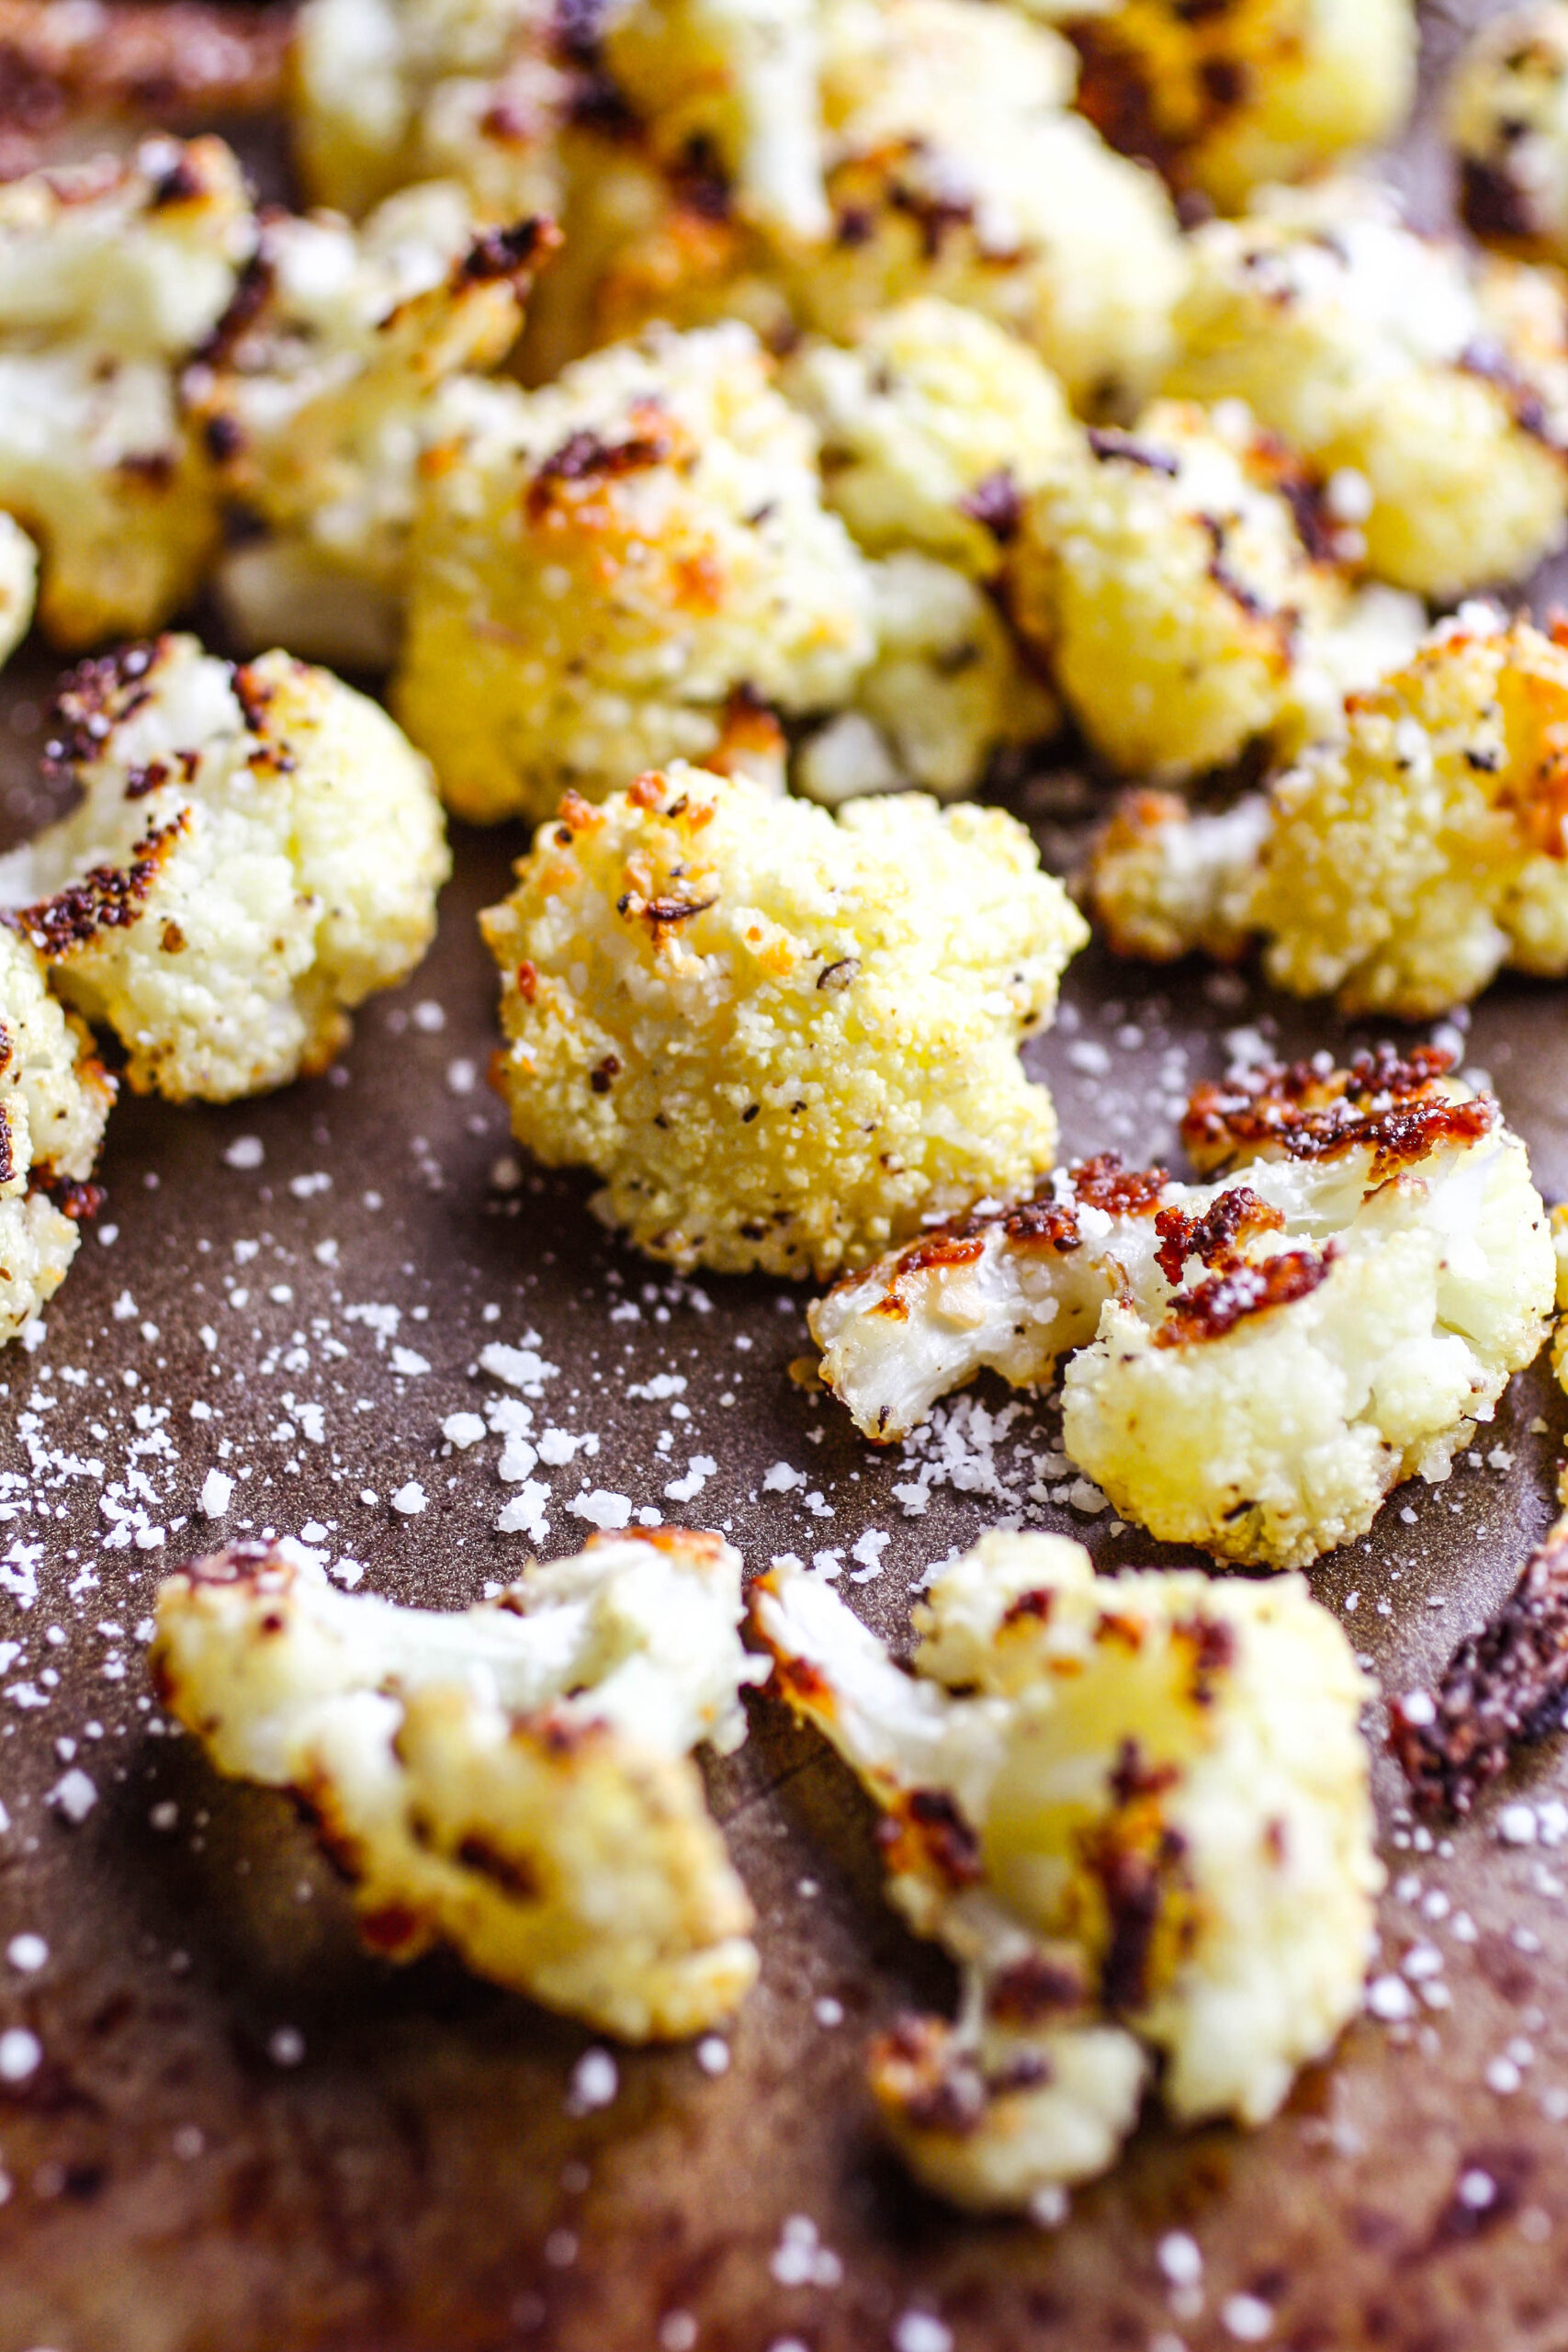 A roasting pan loaded with Parmesan & Herb Roasted Cauliflower Bites